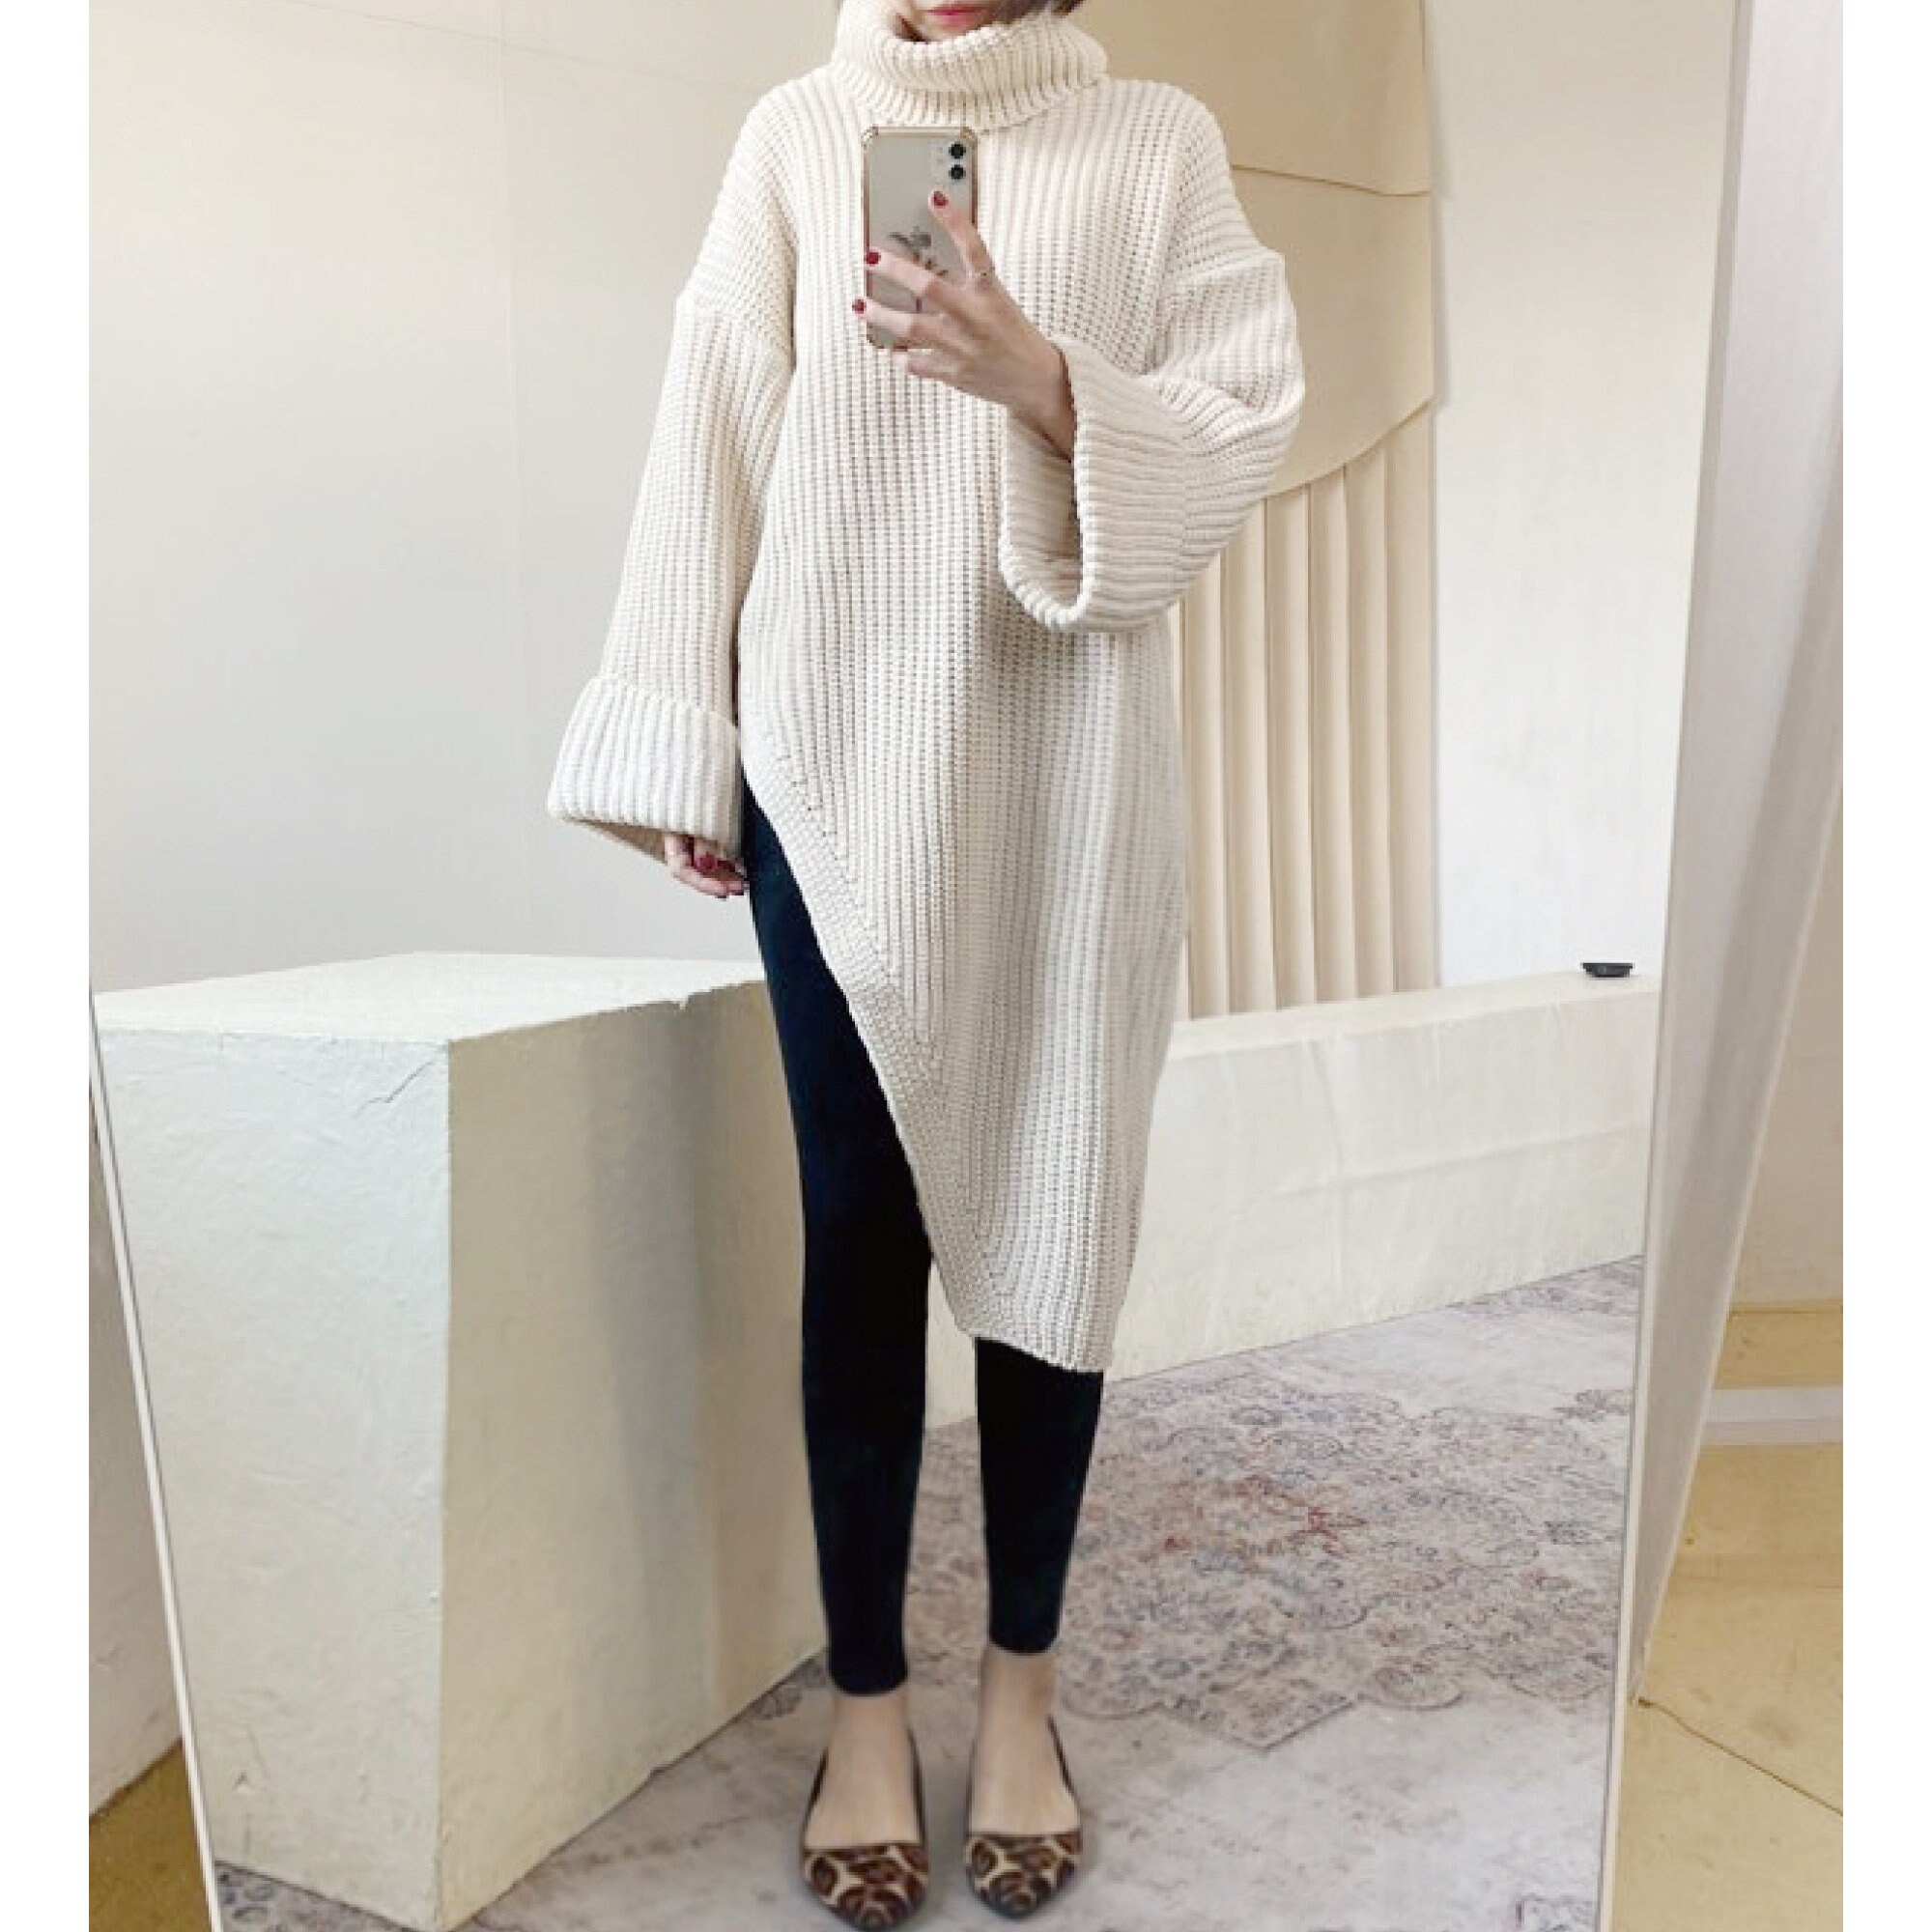 Kleding Dameskleding Sweaters Pullovers Loose Fitting Two Piece Knit Set for Women with Wide Leg Pants and Funnel Neck Sweater Tunic Luxury Relaxed Fit Knitted Lounge Suite women 